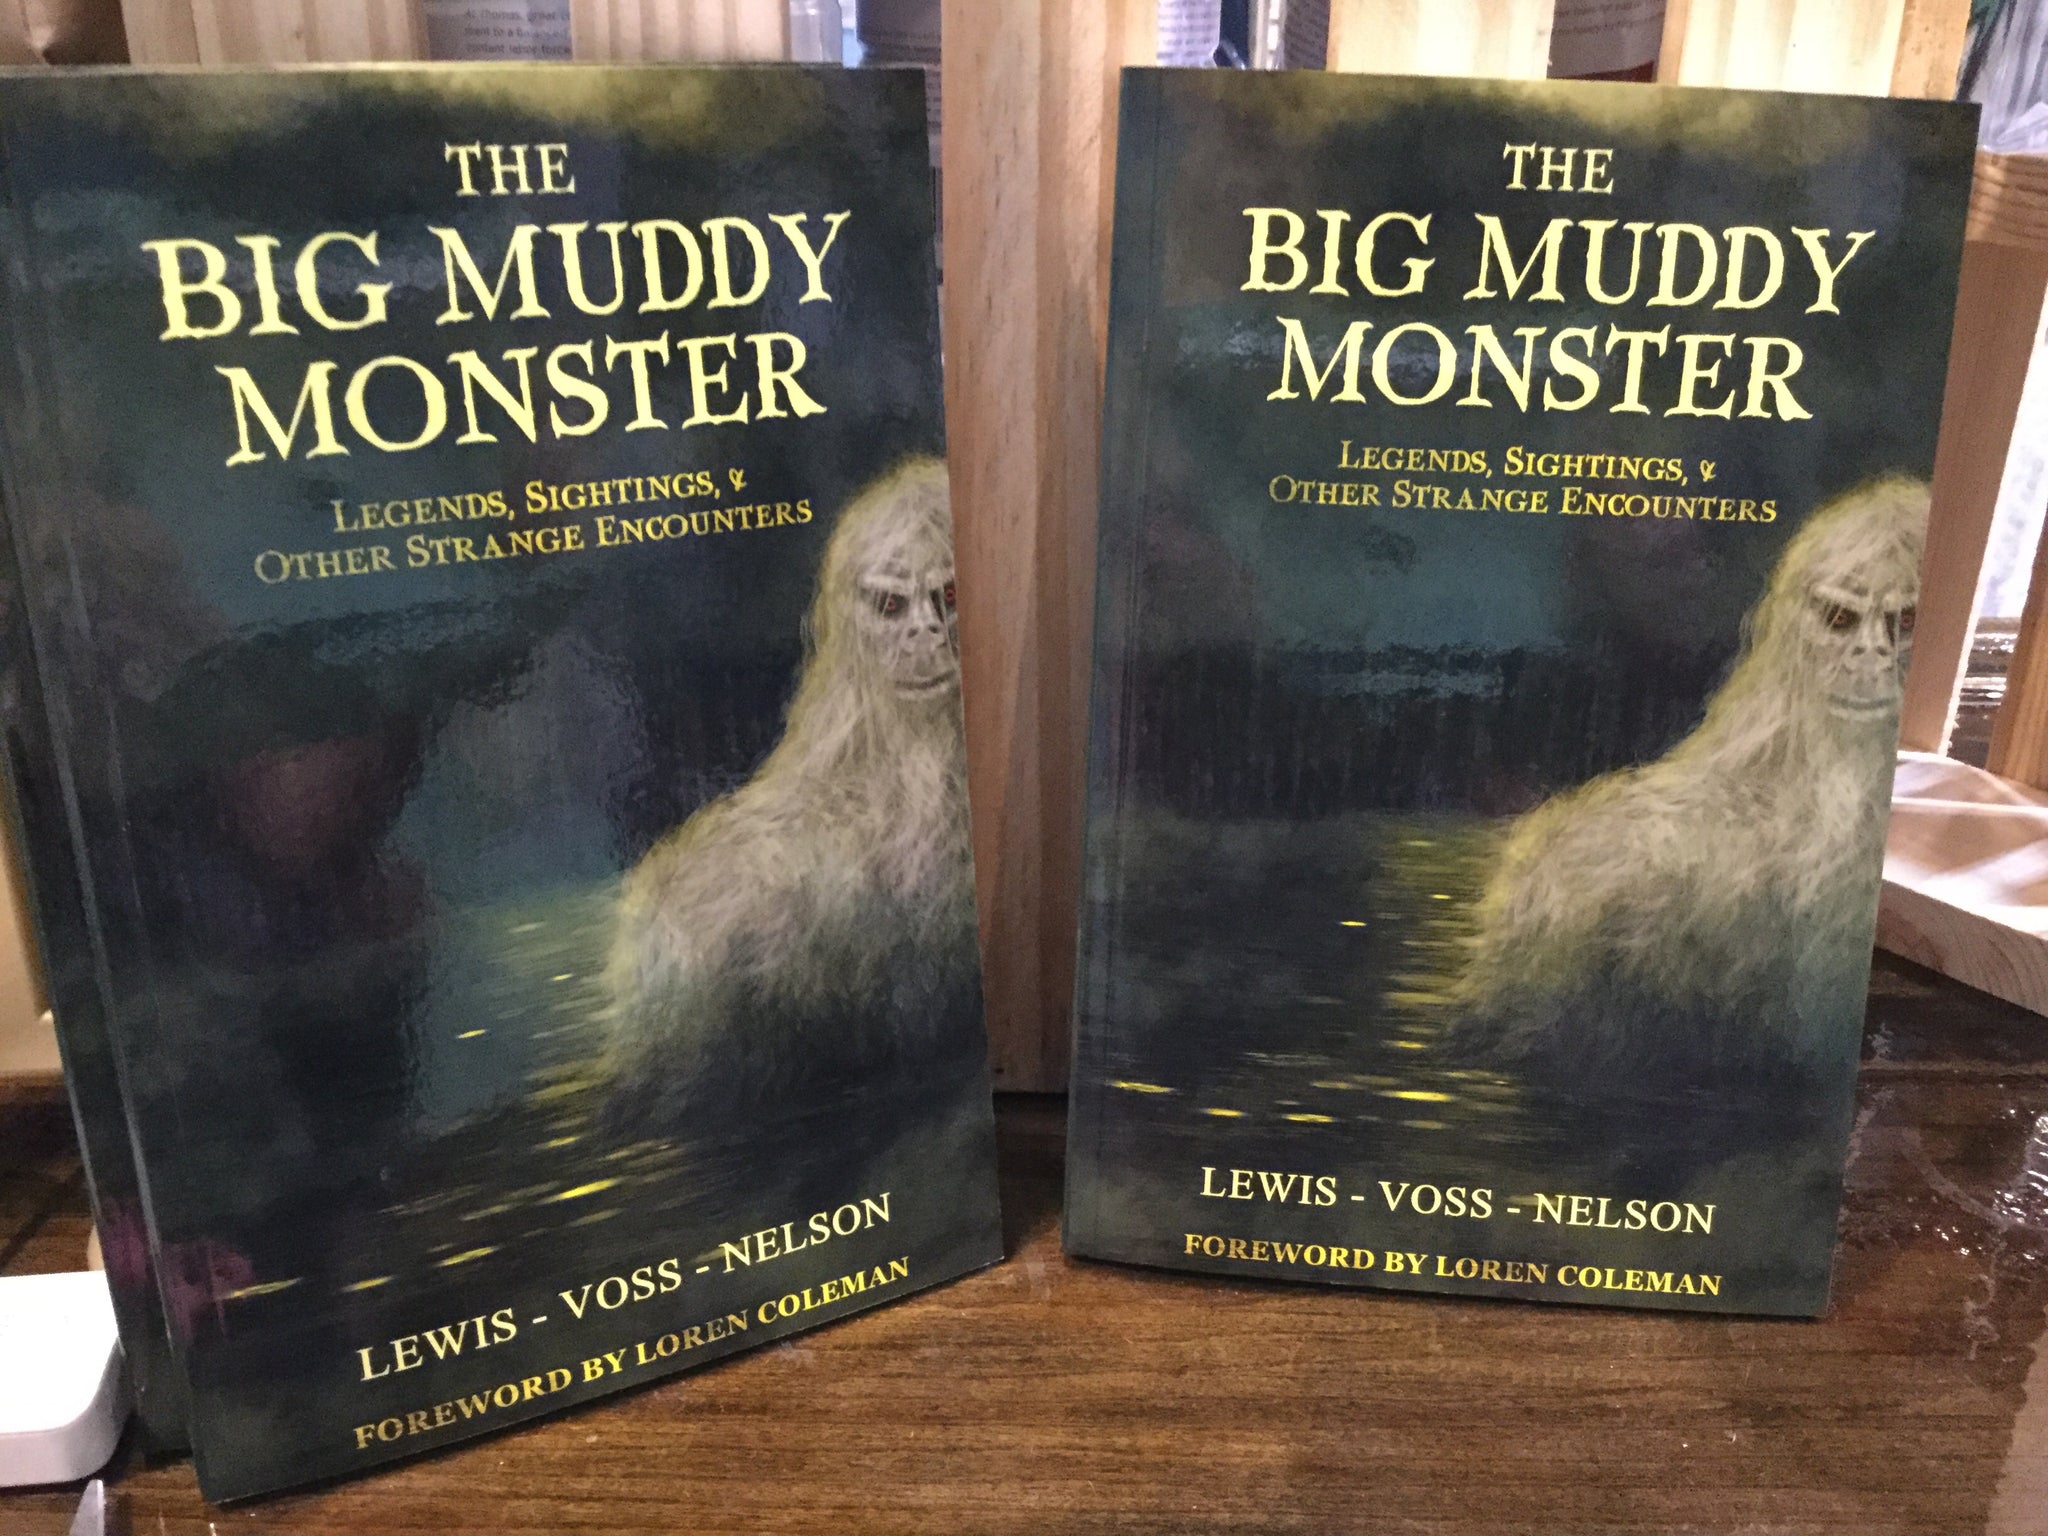 “The Big Muddy Monster” by Lewis-Voss-Nelson